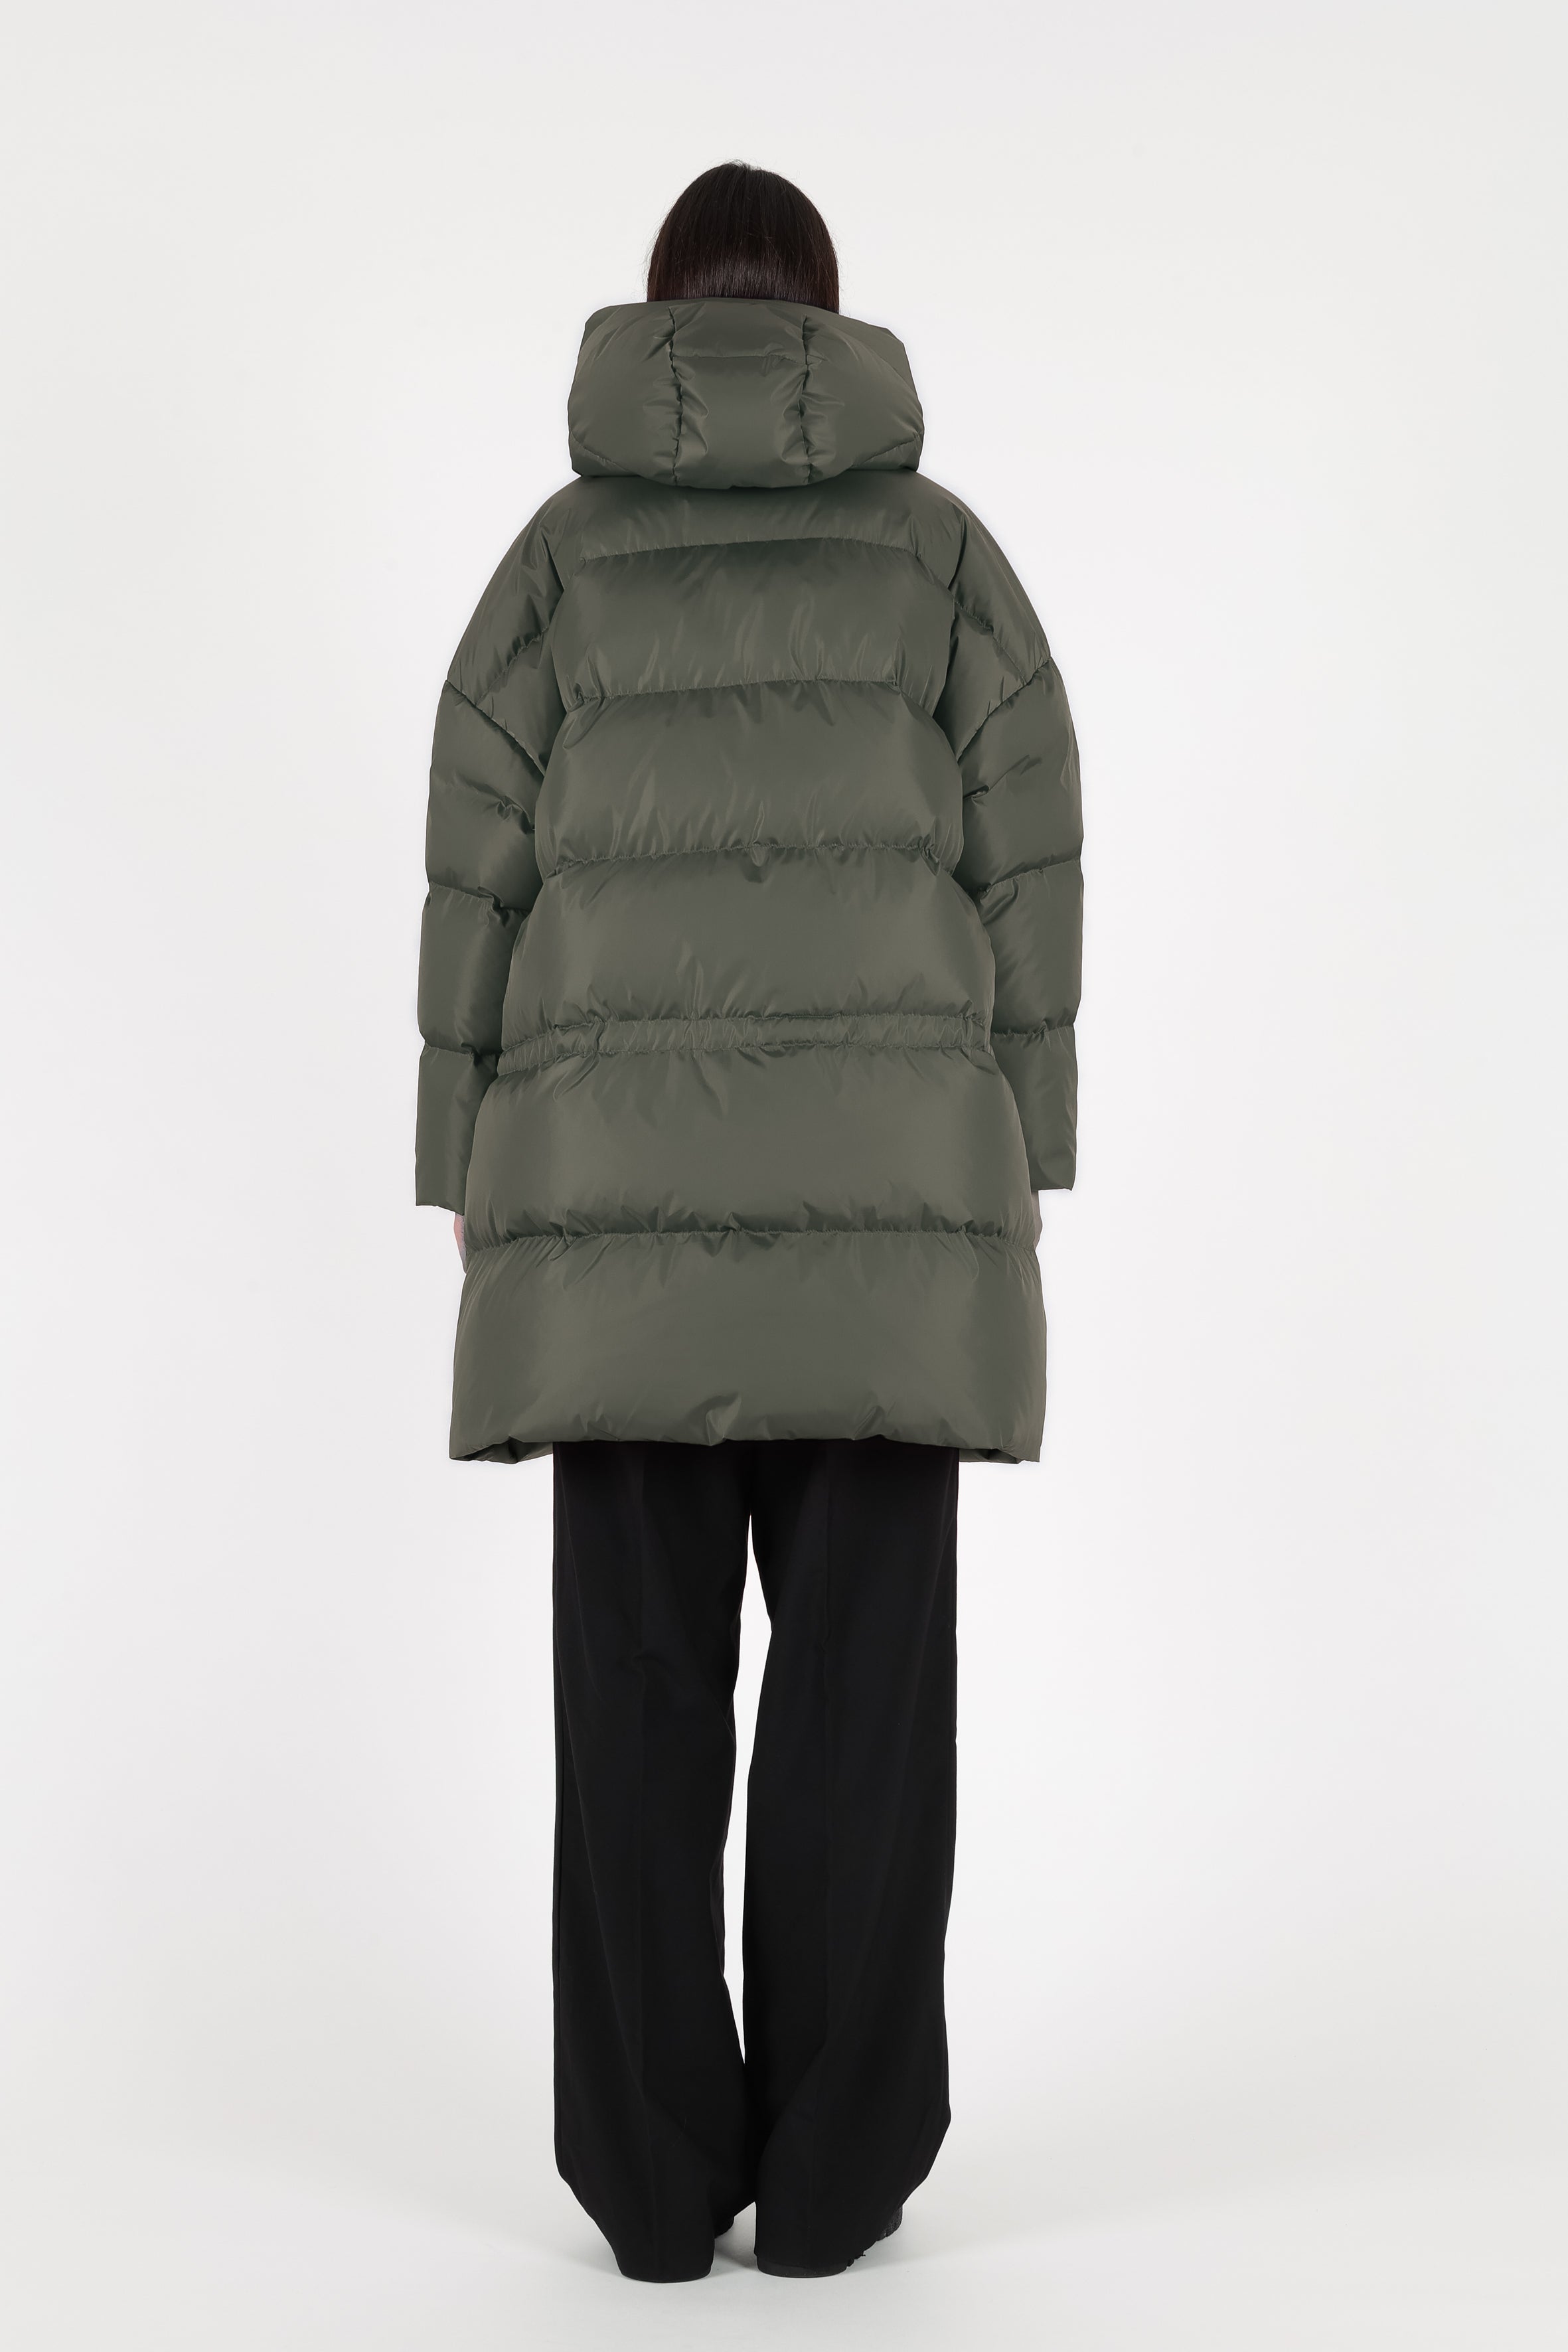 oversized Lempelius down parka in the color military green